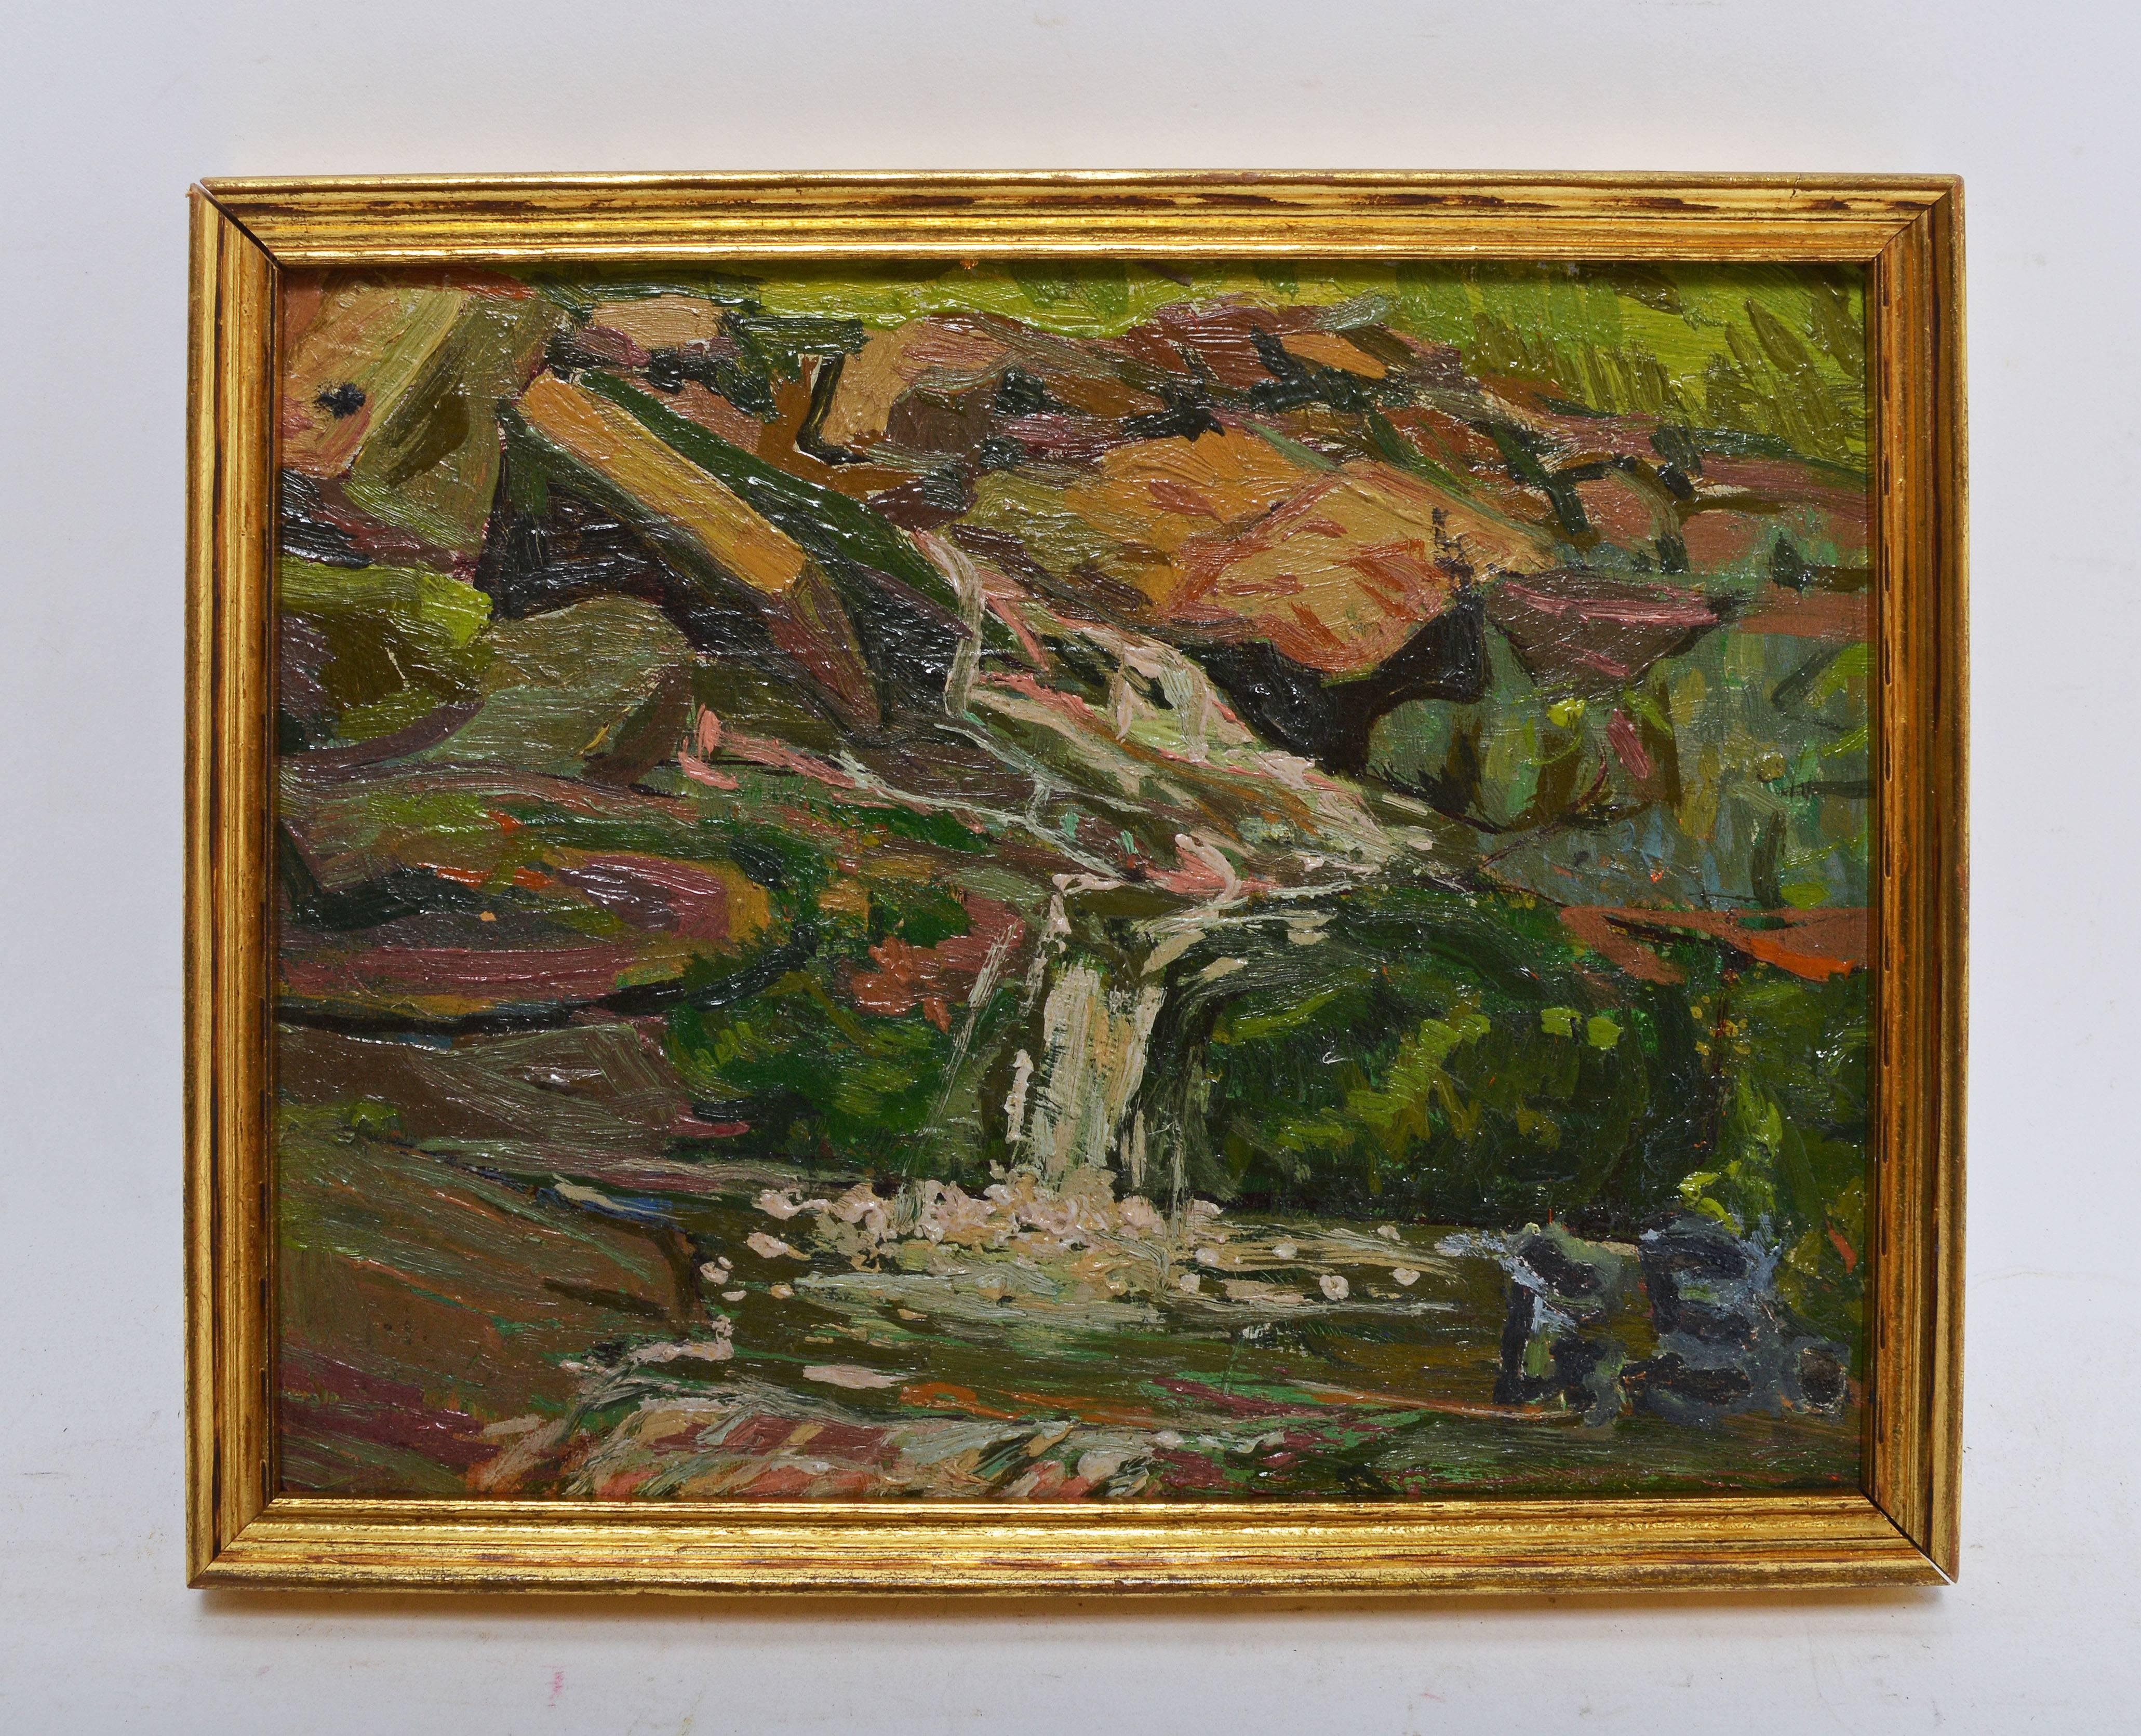 Impressionist landscape of a waterfall by George Gardner Symons  (1863 - 1930).  Oil on board, circa 1920.  Signed lower right, 